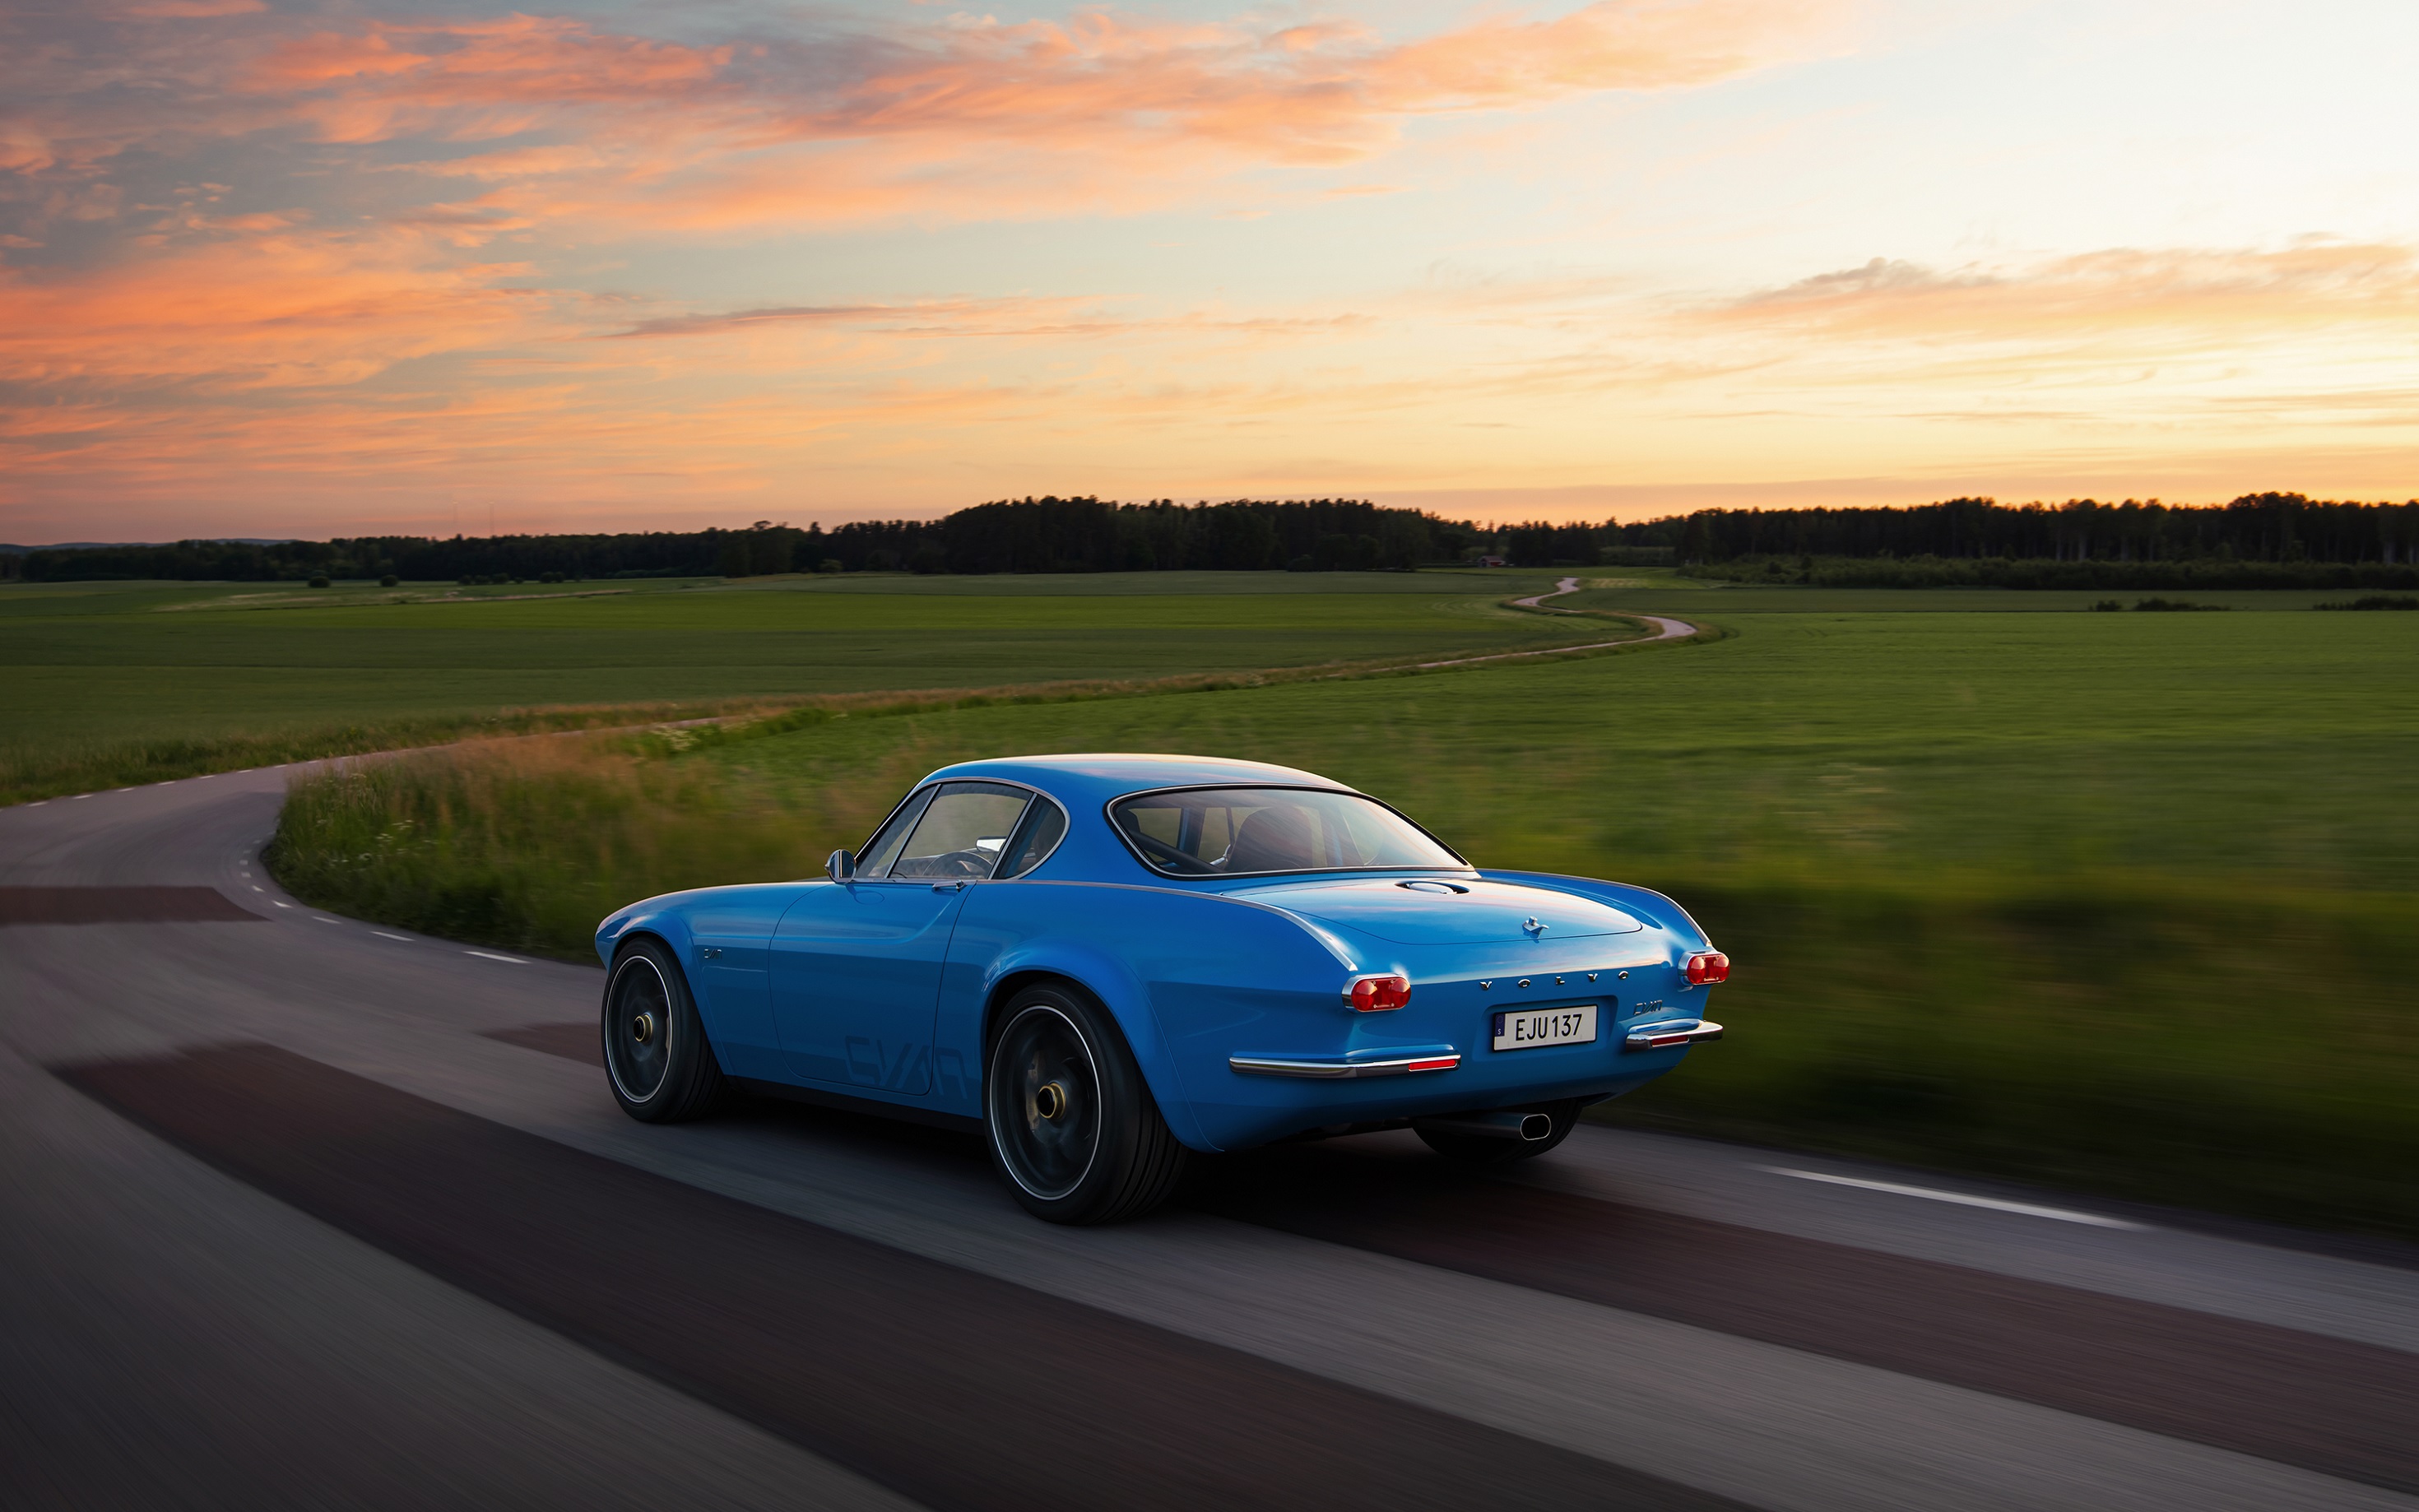 The rear 3/4 view of a blue Volvo P1800 Cyan driving on a country road